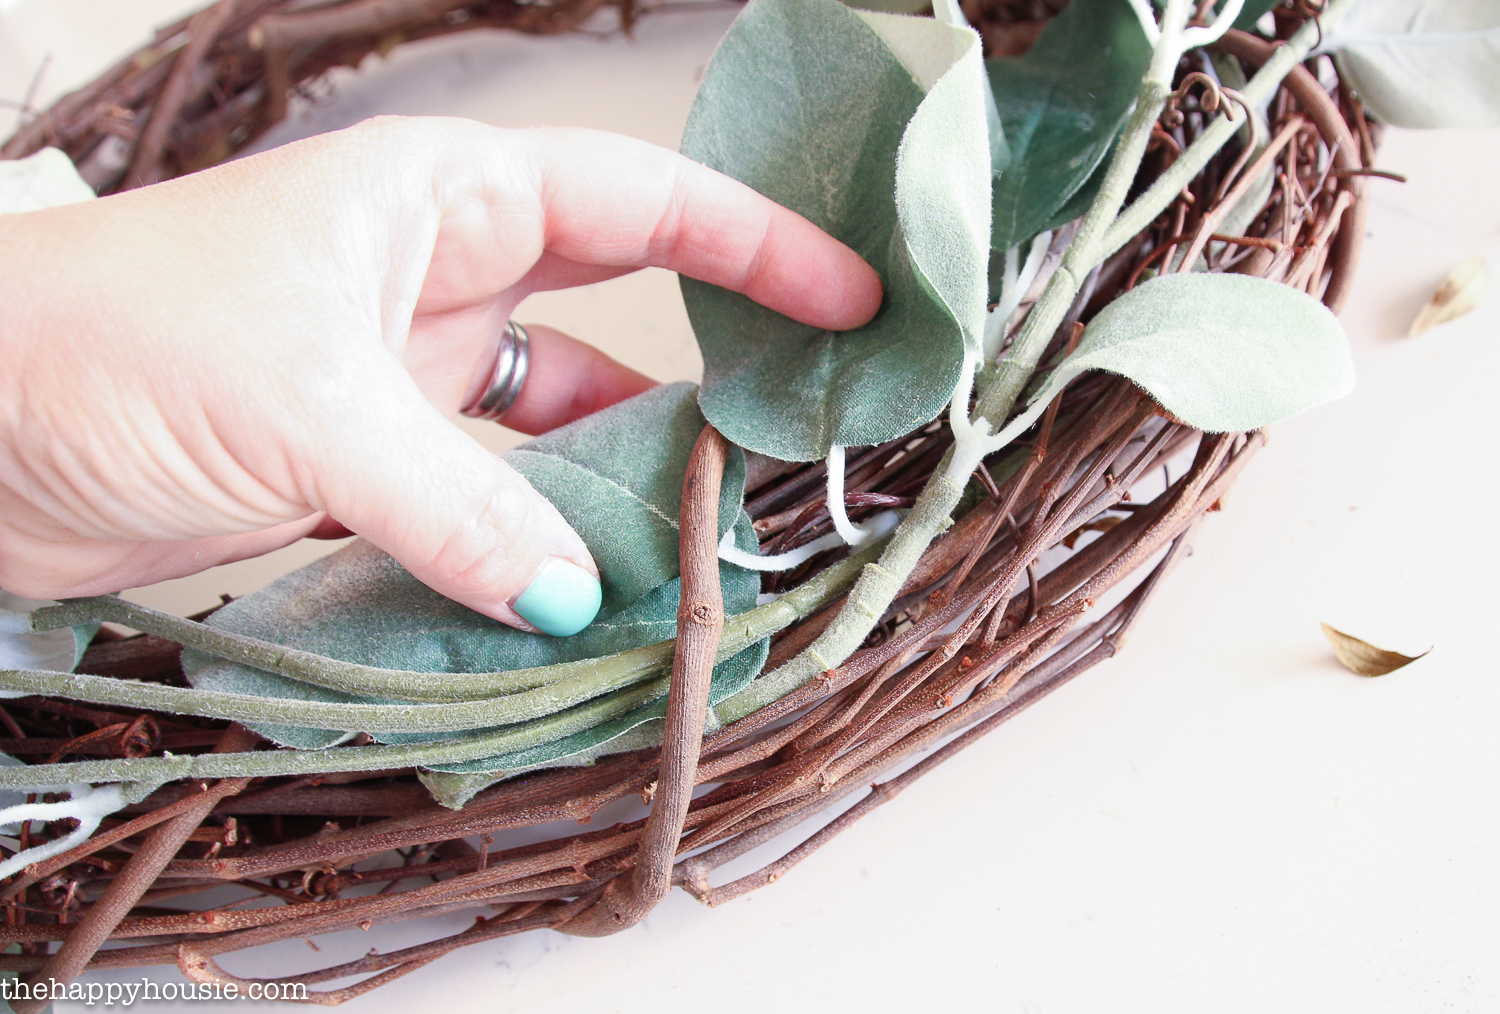 Bending the leaves and stems to fit on the wreath.